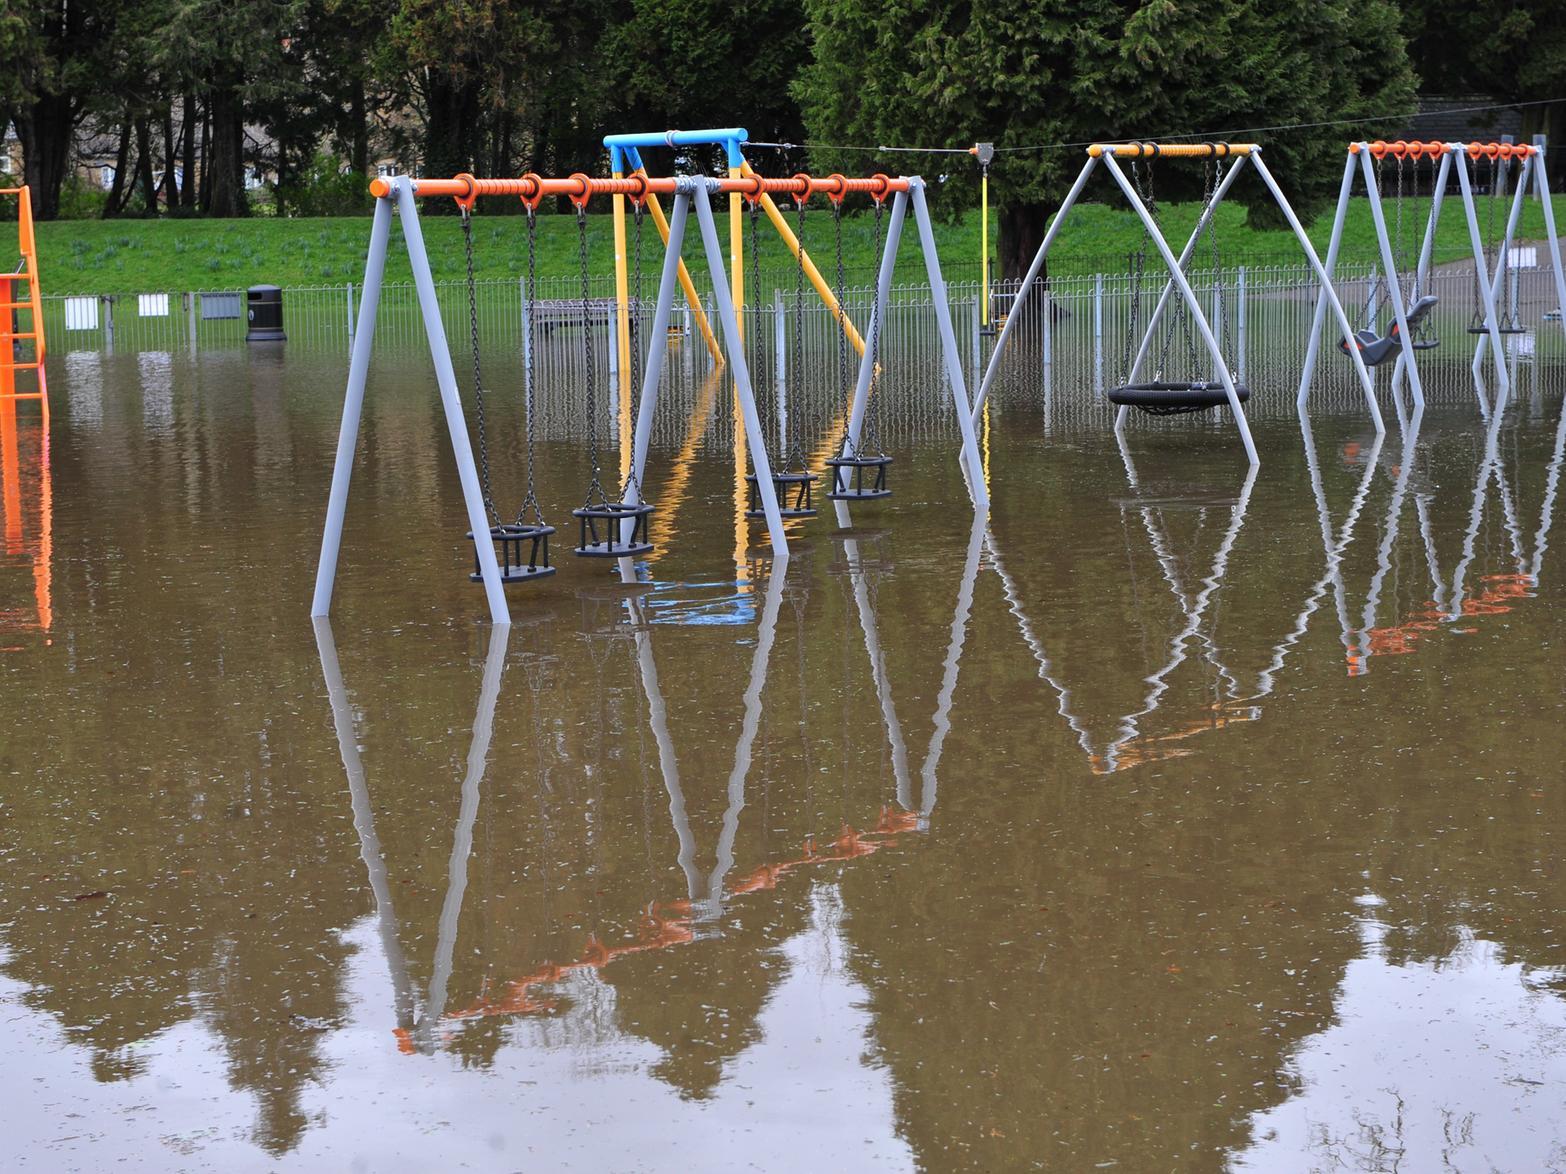 Play areas became water parks at times thanks to the relentless stormy weather.